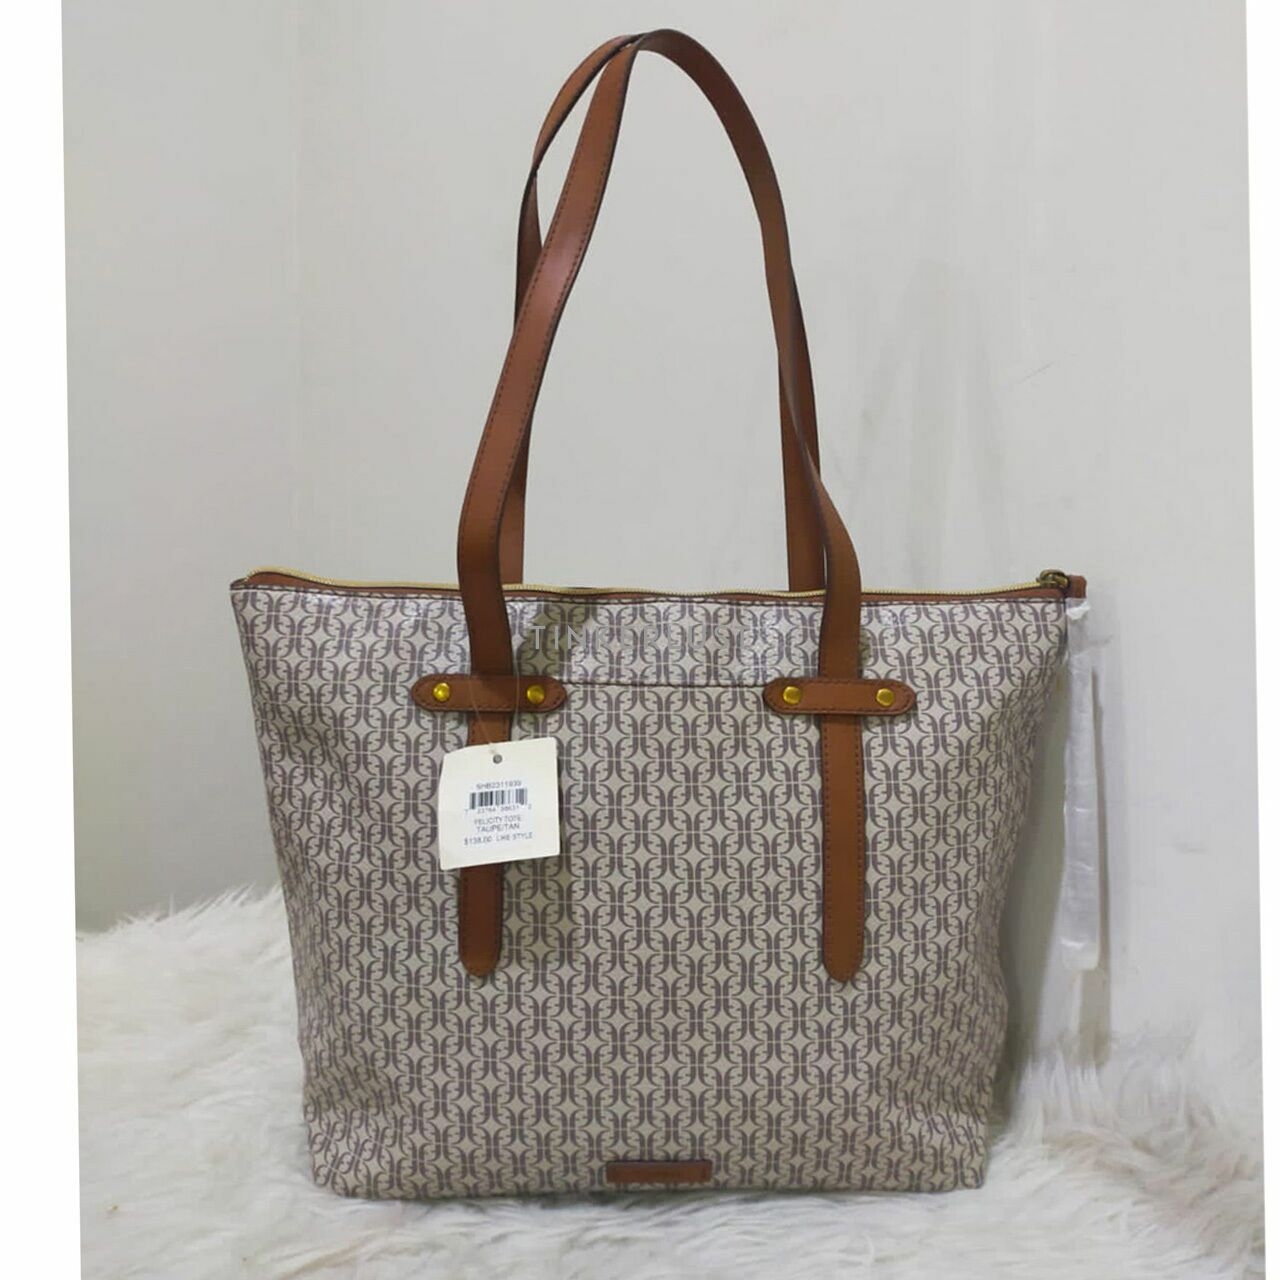 Fossil Felicity Tote Taupe/Tan